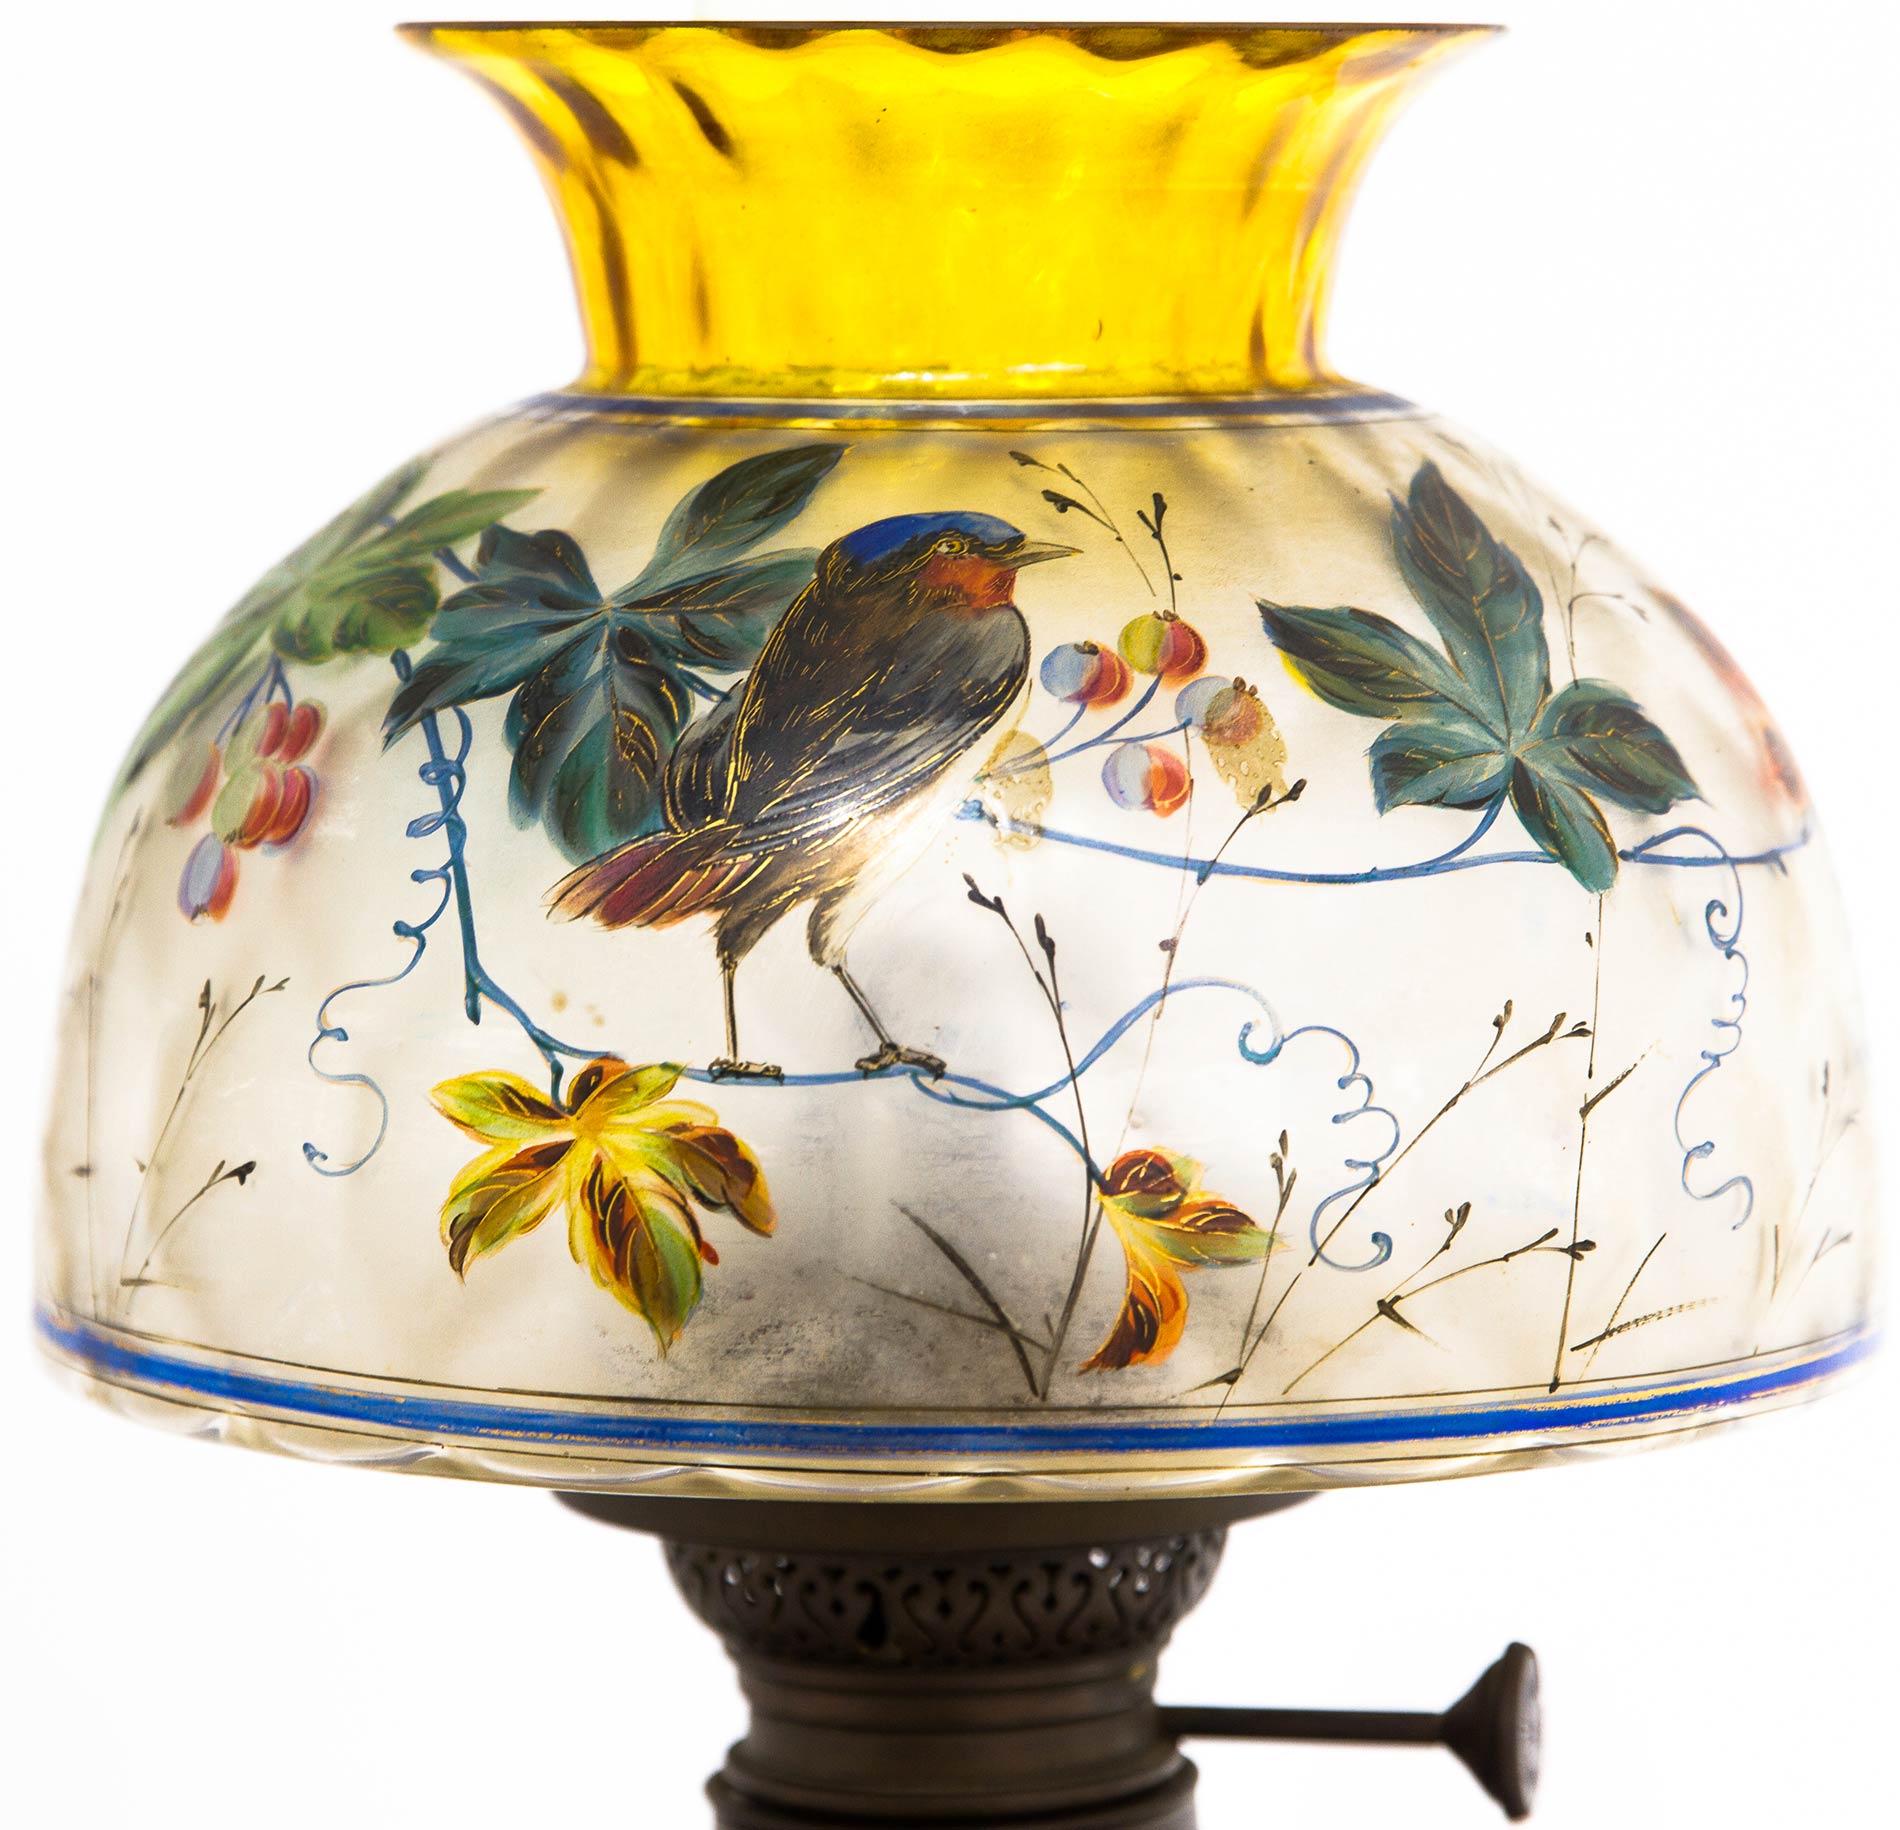 Petrol lamp in opaline, with varnished decorations and painted glass goblet. 19th century. H 75cm - Image 2 of 6